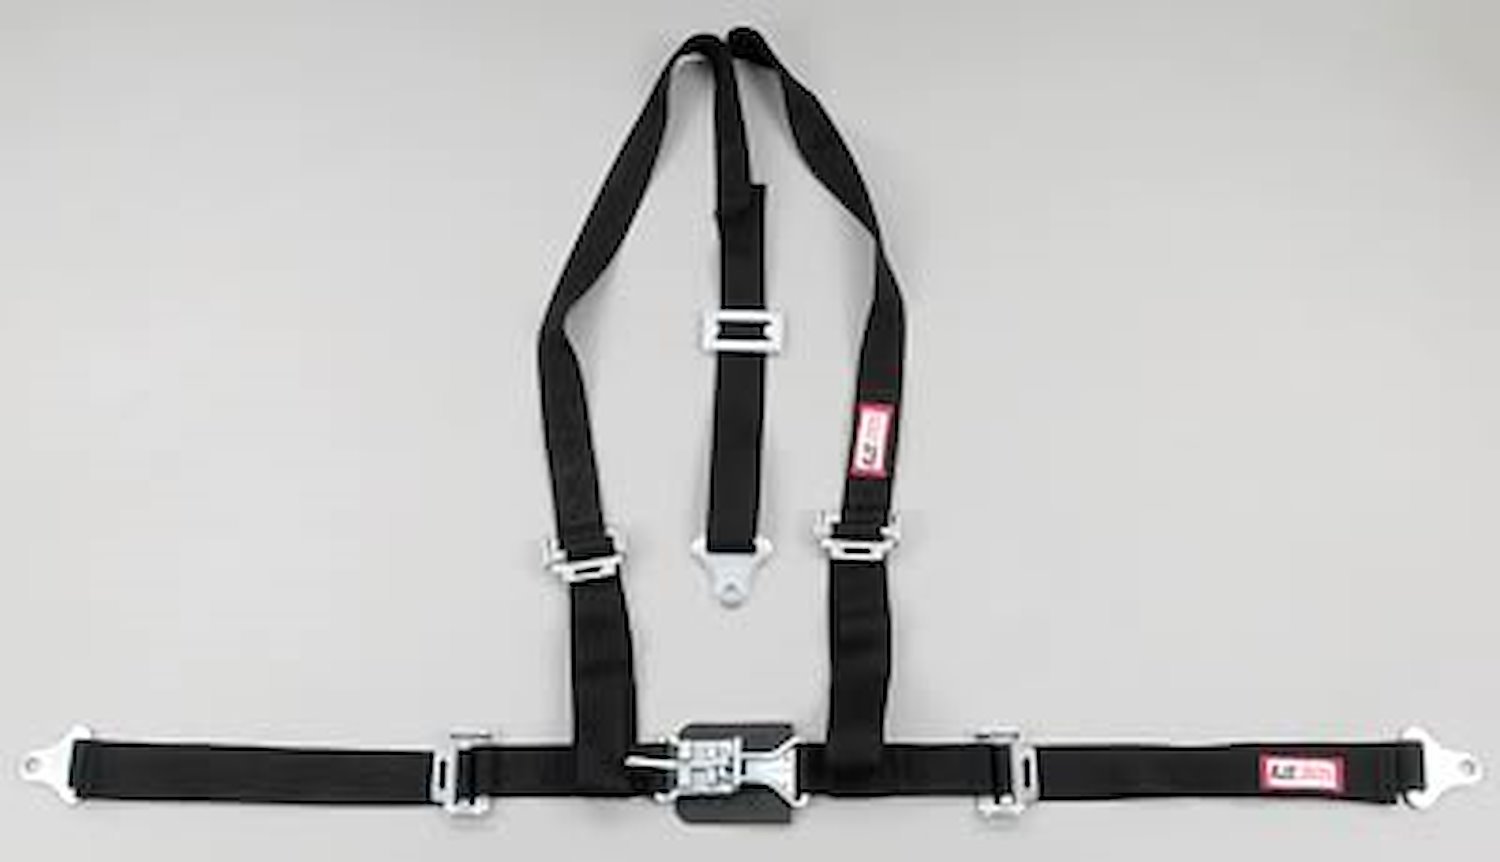 NON-SFI L&L HARNESS 3 PULL UP Lap Belt SNAP SEWN IN 2 S.H. Individual FLOOR Mount w/STERNUM STRAP WRAP/SNAP BLUE